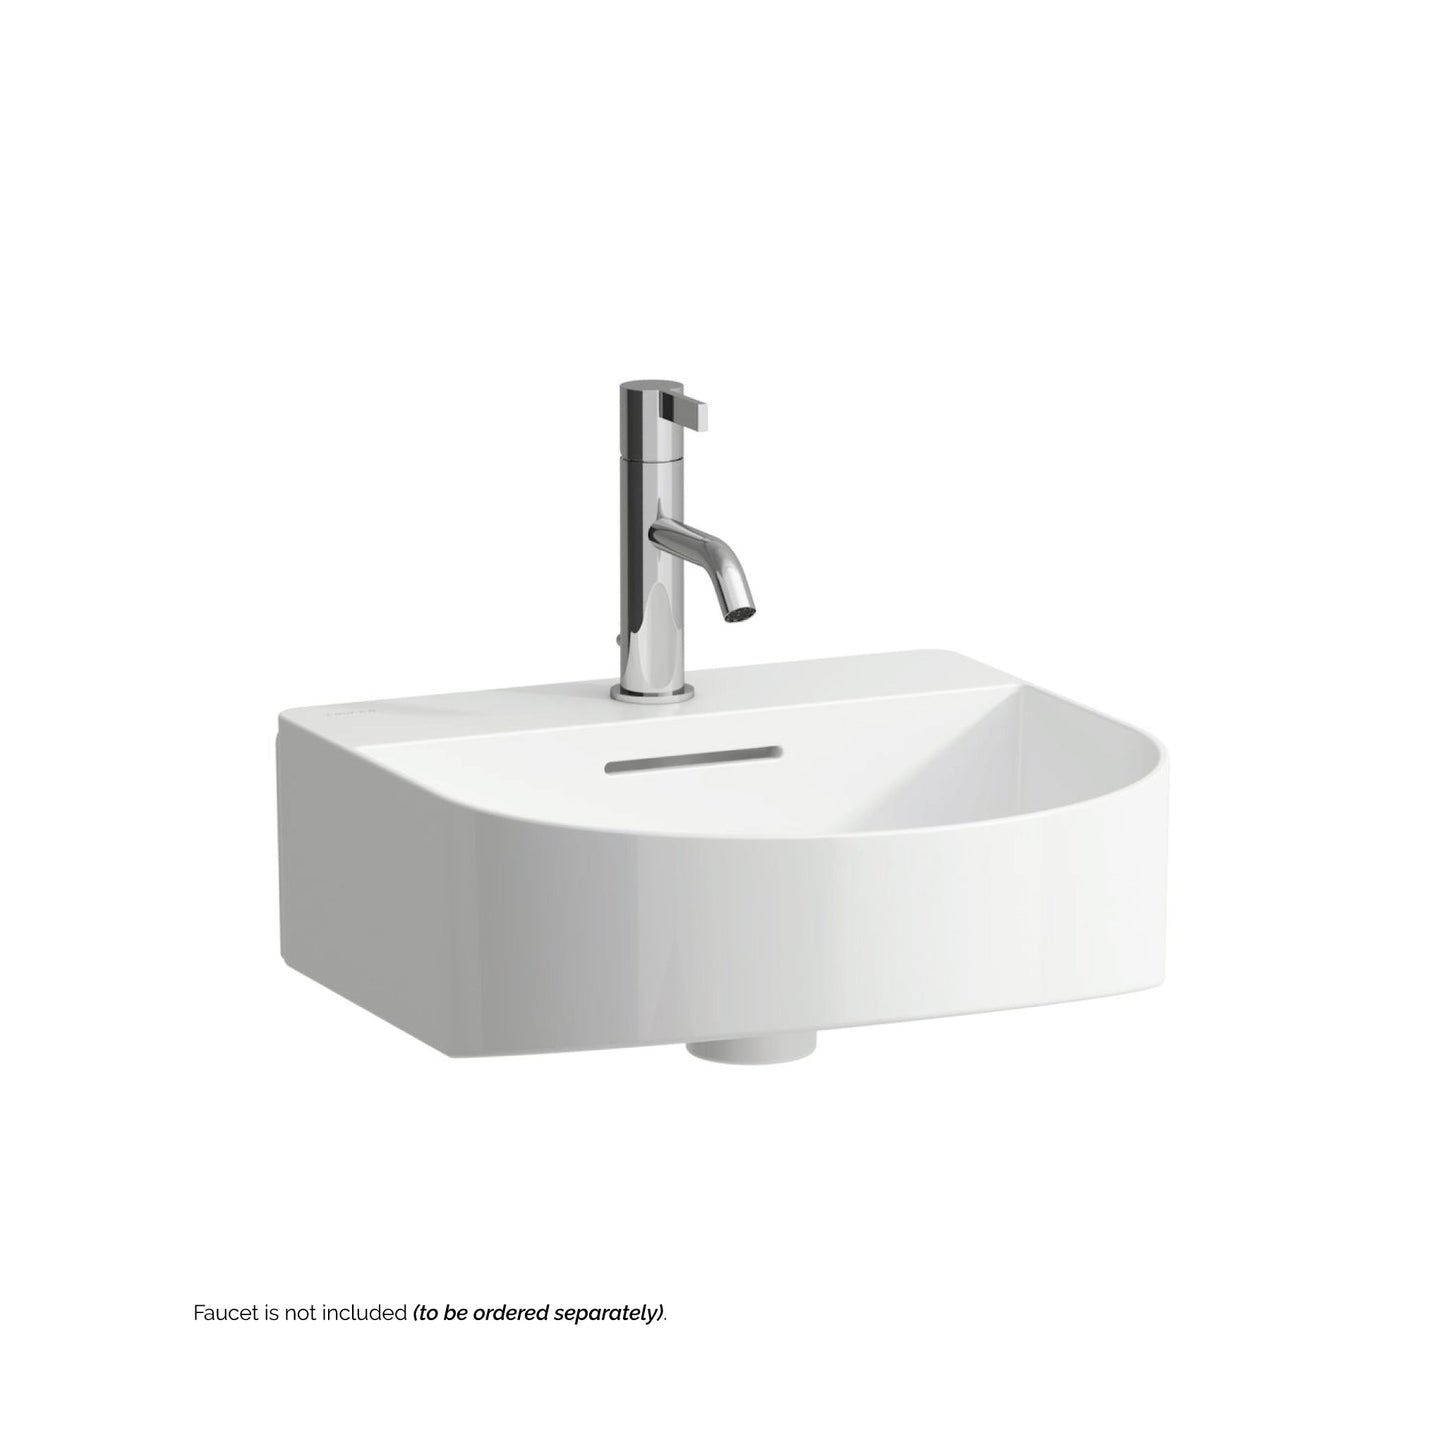 Laufen Sonar 16" White Ceramic Wall-Mounted Bathroom Sink With Faucet Hole